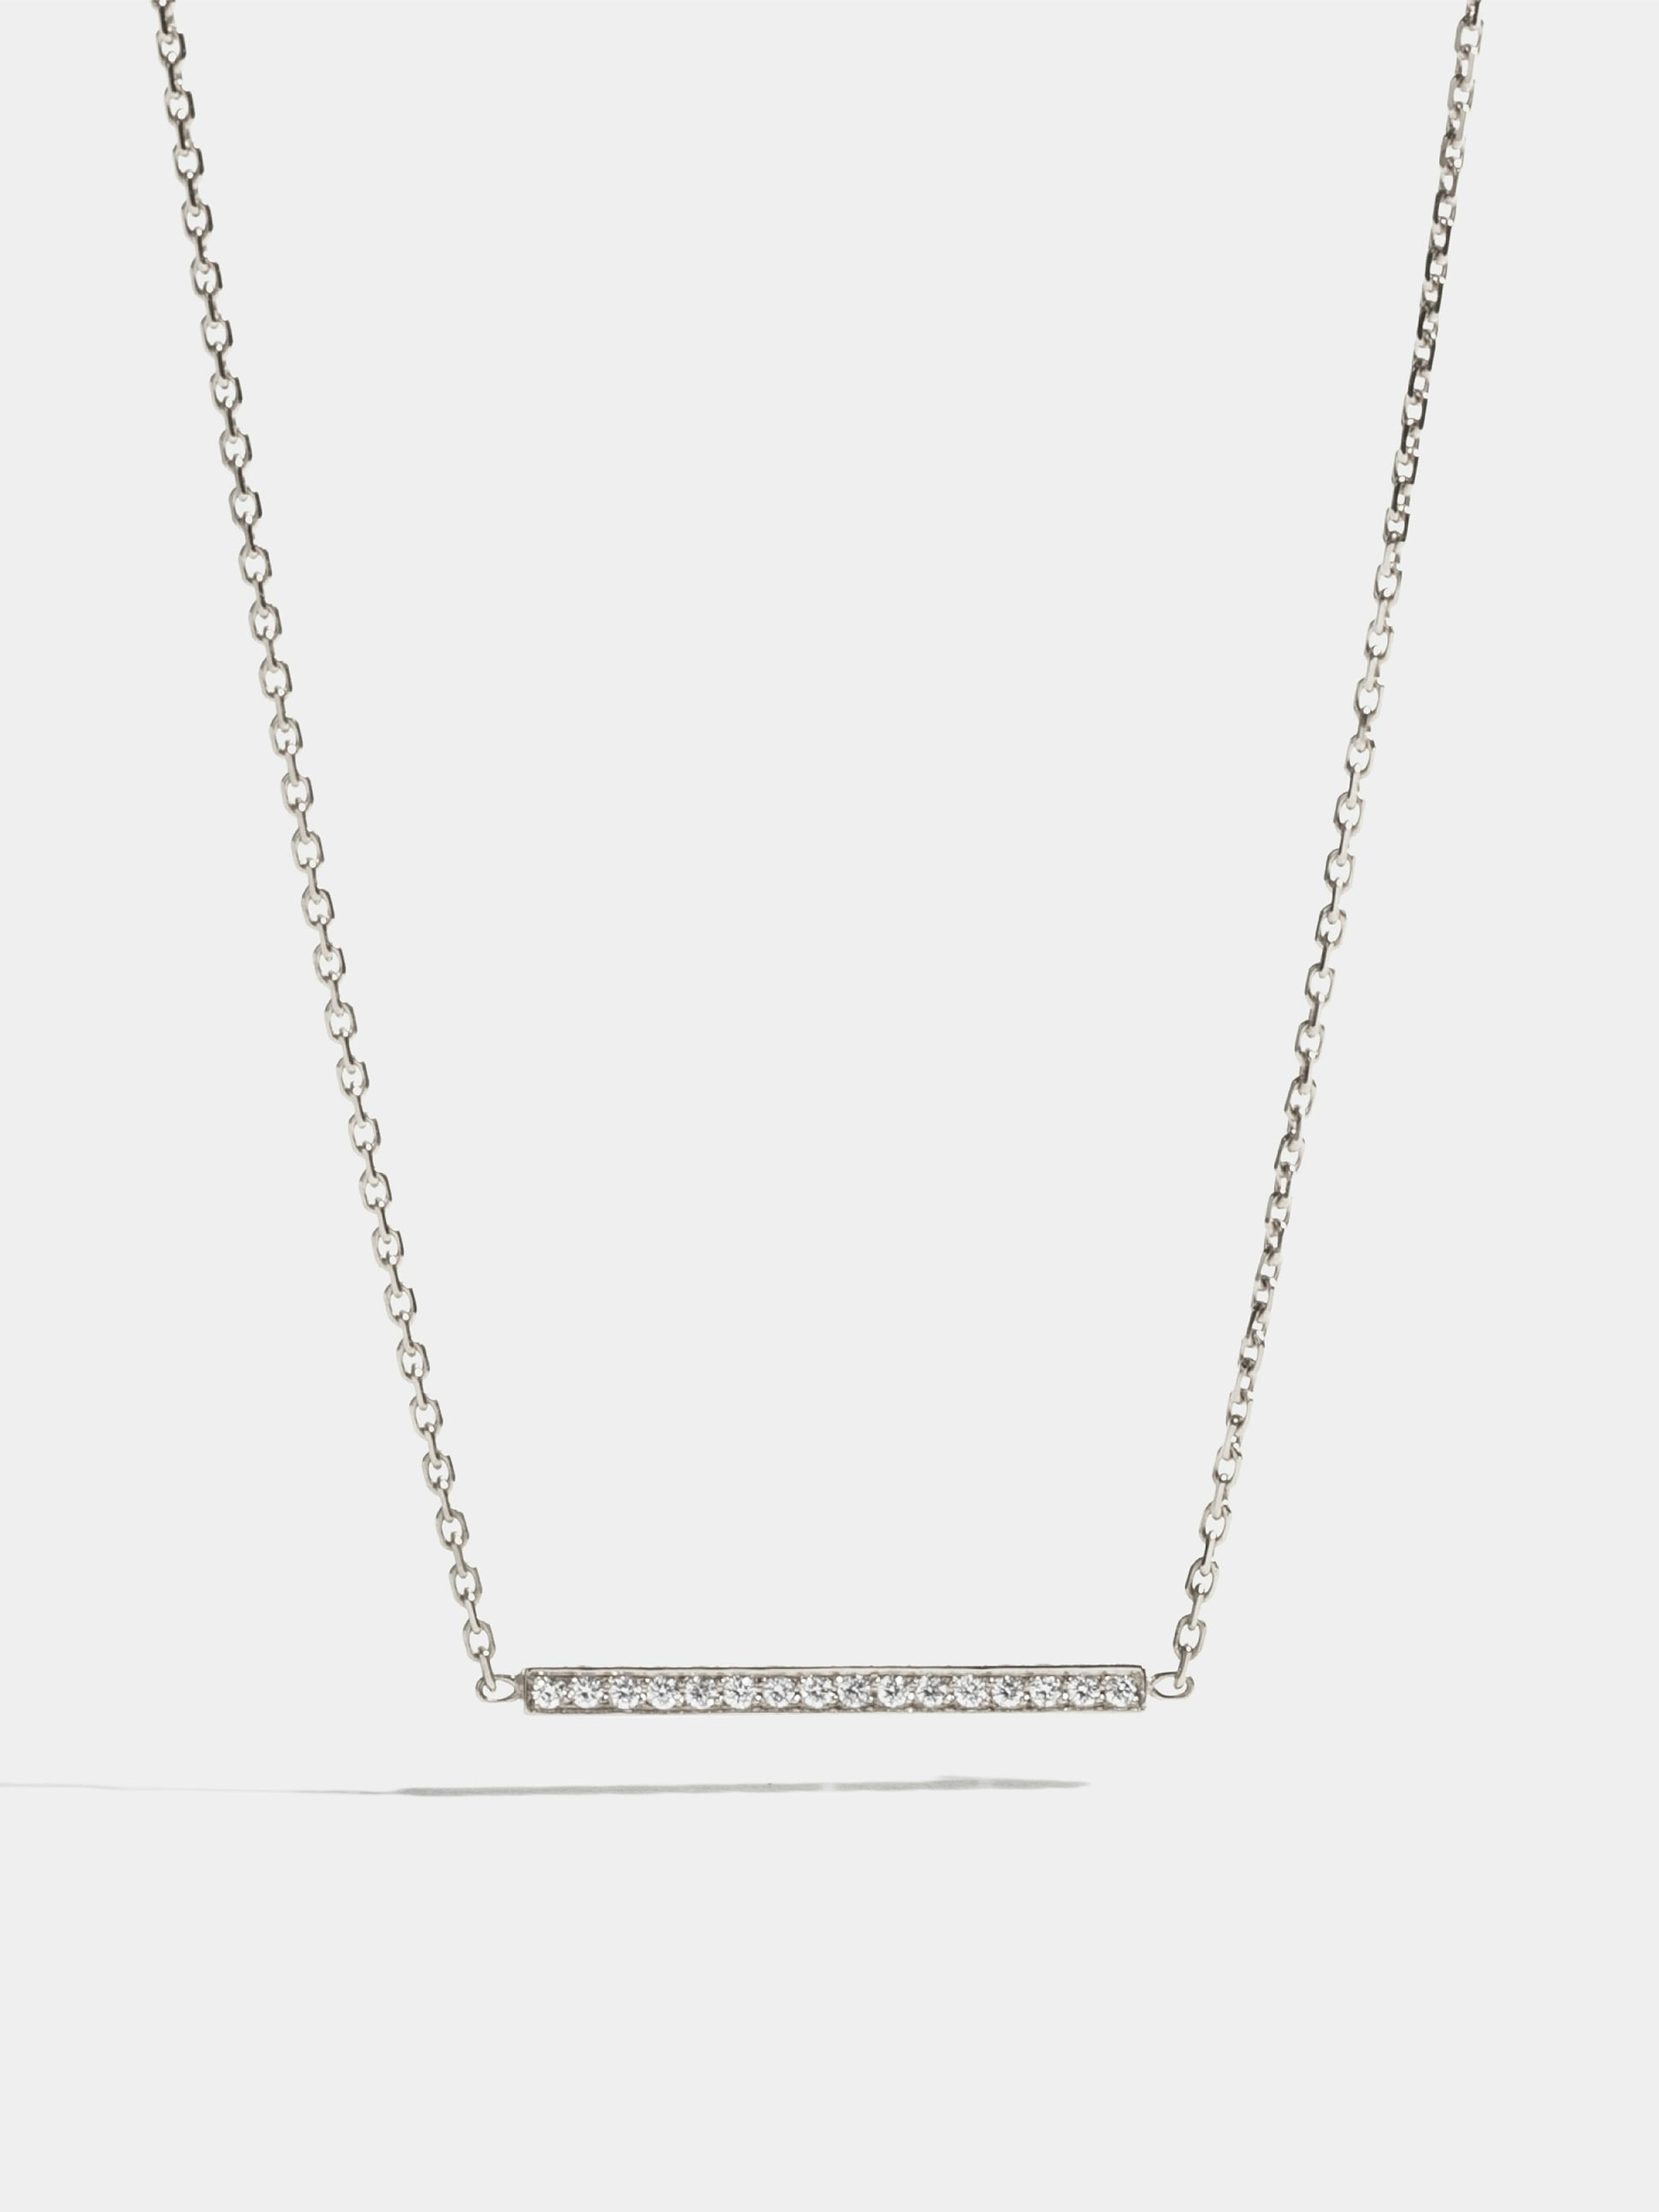 Motif Anagramme paved flat ribbon in white gold 18k Fairmined ethical, on 42 cm chain